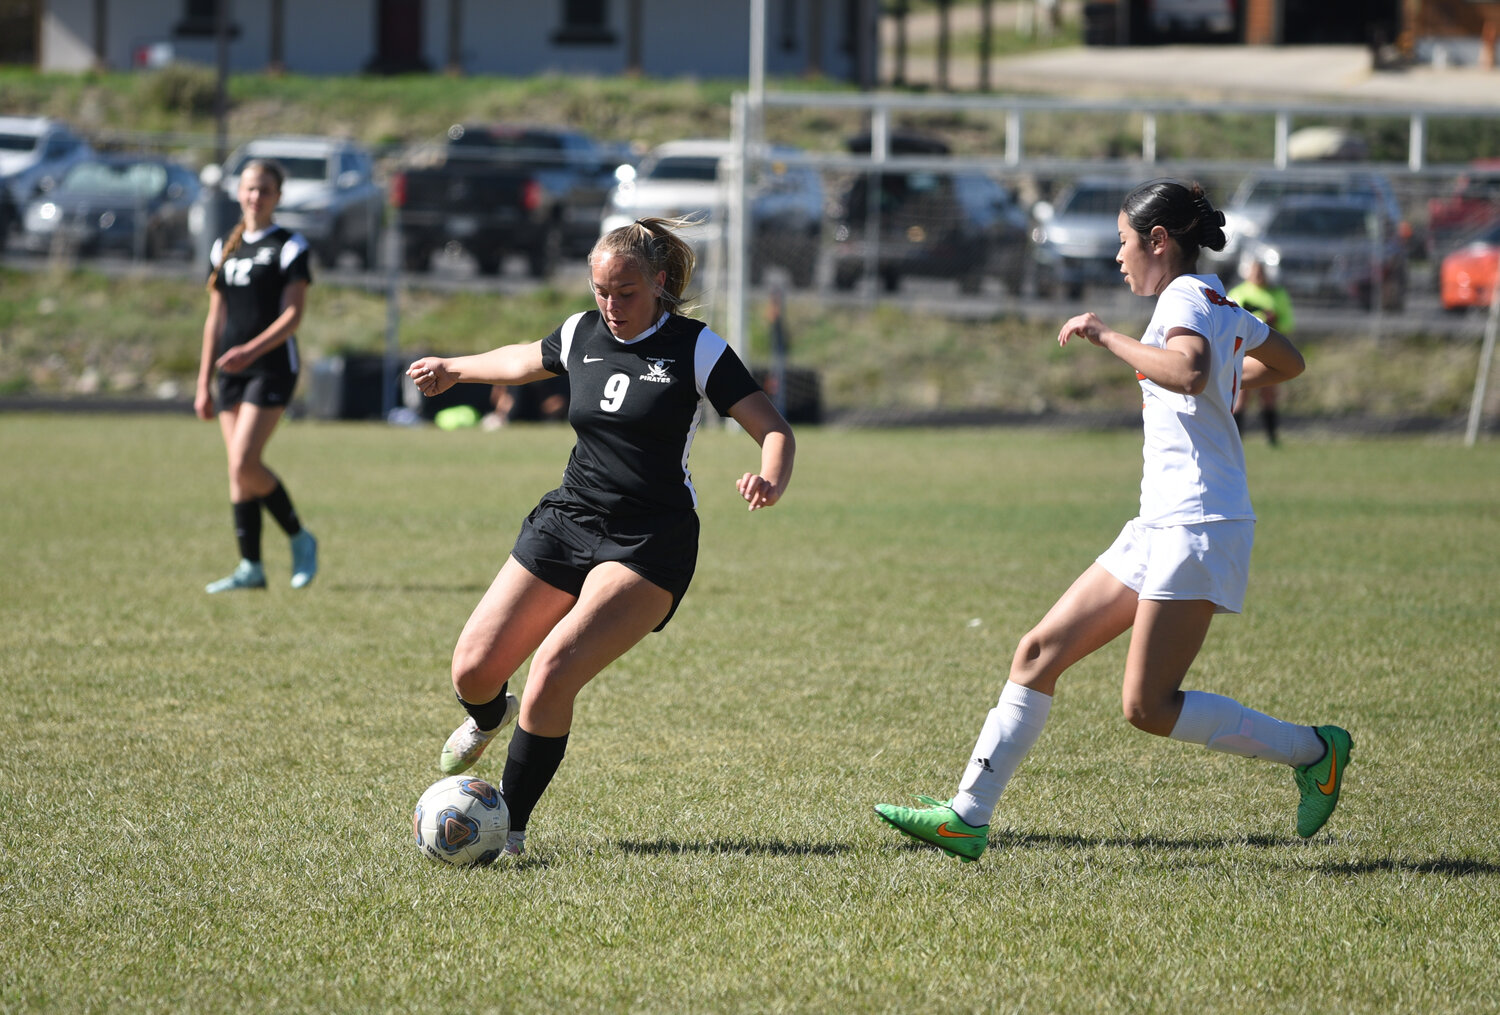 Lady Pirate senior Taylor Elliott sends the ball up the field during a game against the Del Norte Tigers on April 30. Elliott scored one goal in the match, which was her final home game for the team.